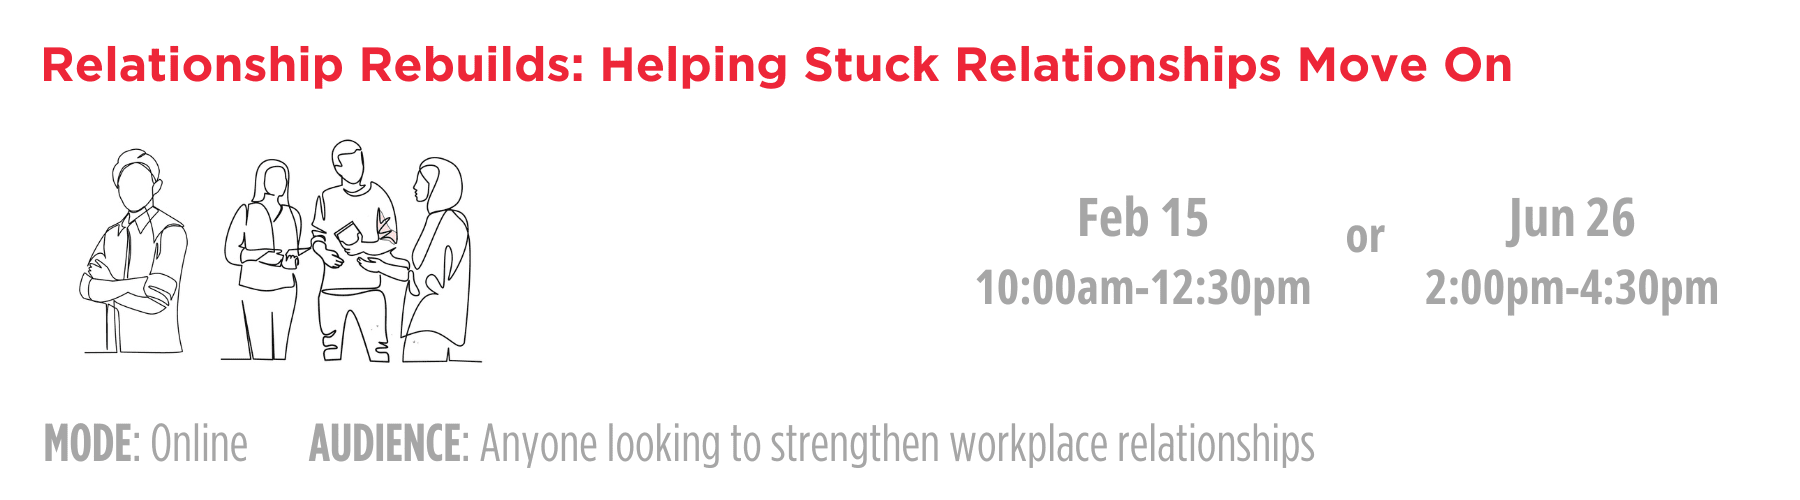 Relationship-Rebuilds-Helping-Stuck-Relationships-Move-On